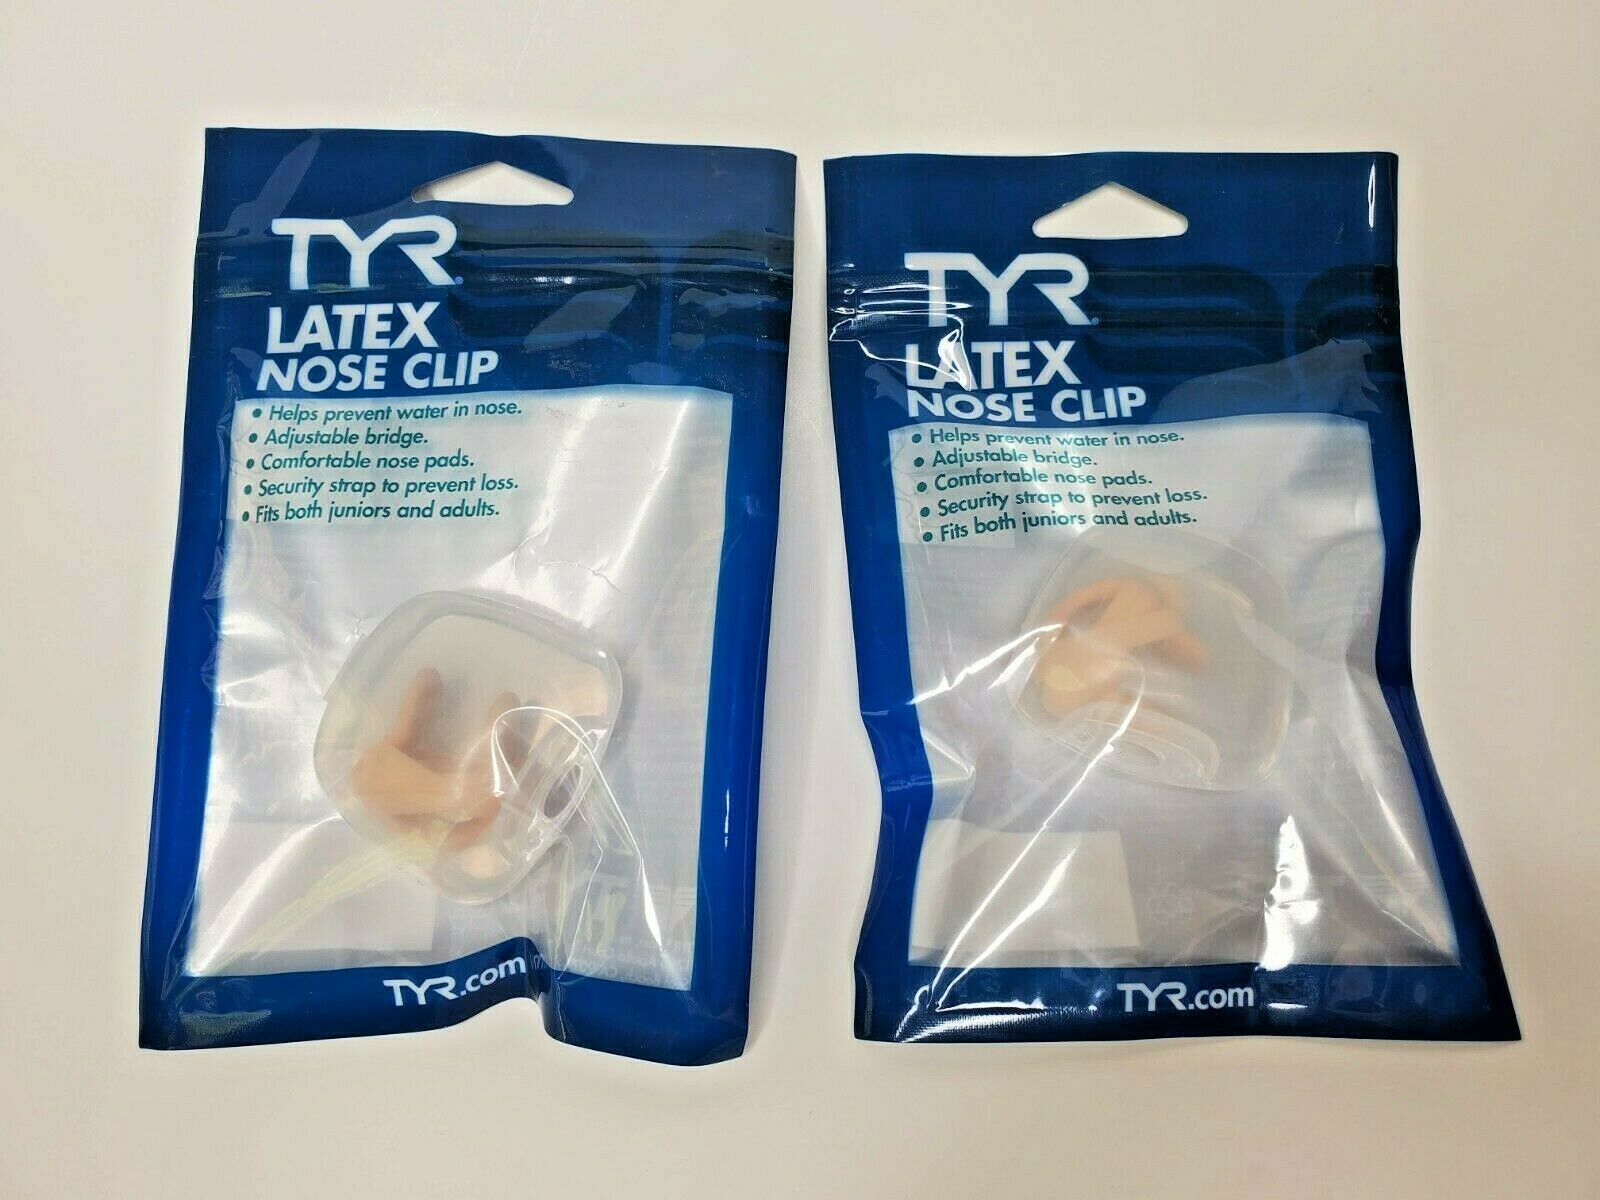 Lot Of 2 Tyr Latex Nose Clip W/ Case Swimming Fits Juniors & Adults No Color New